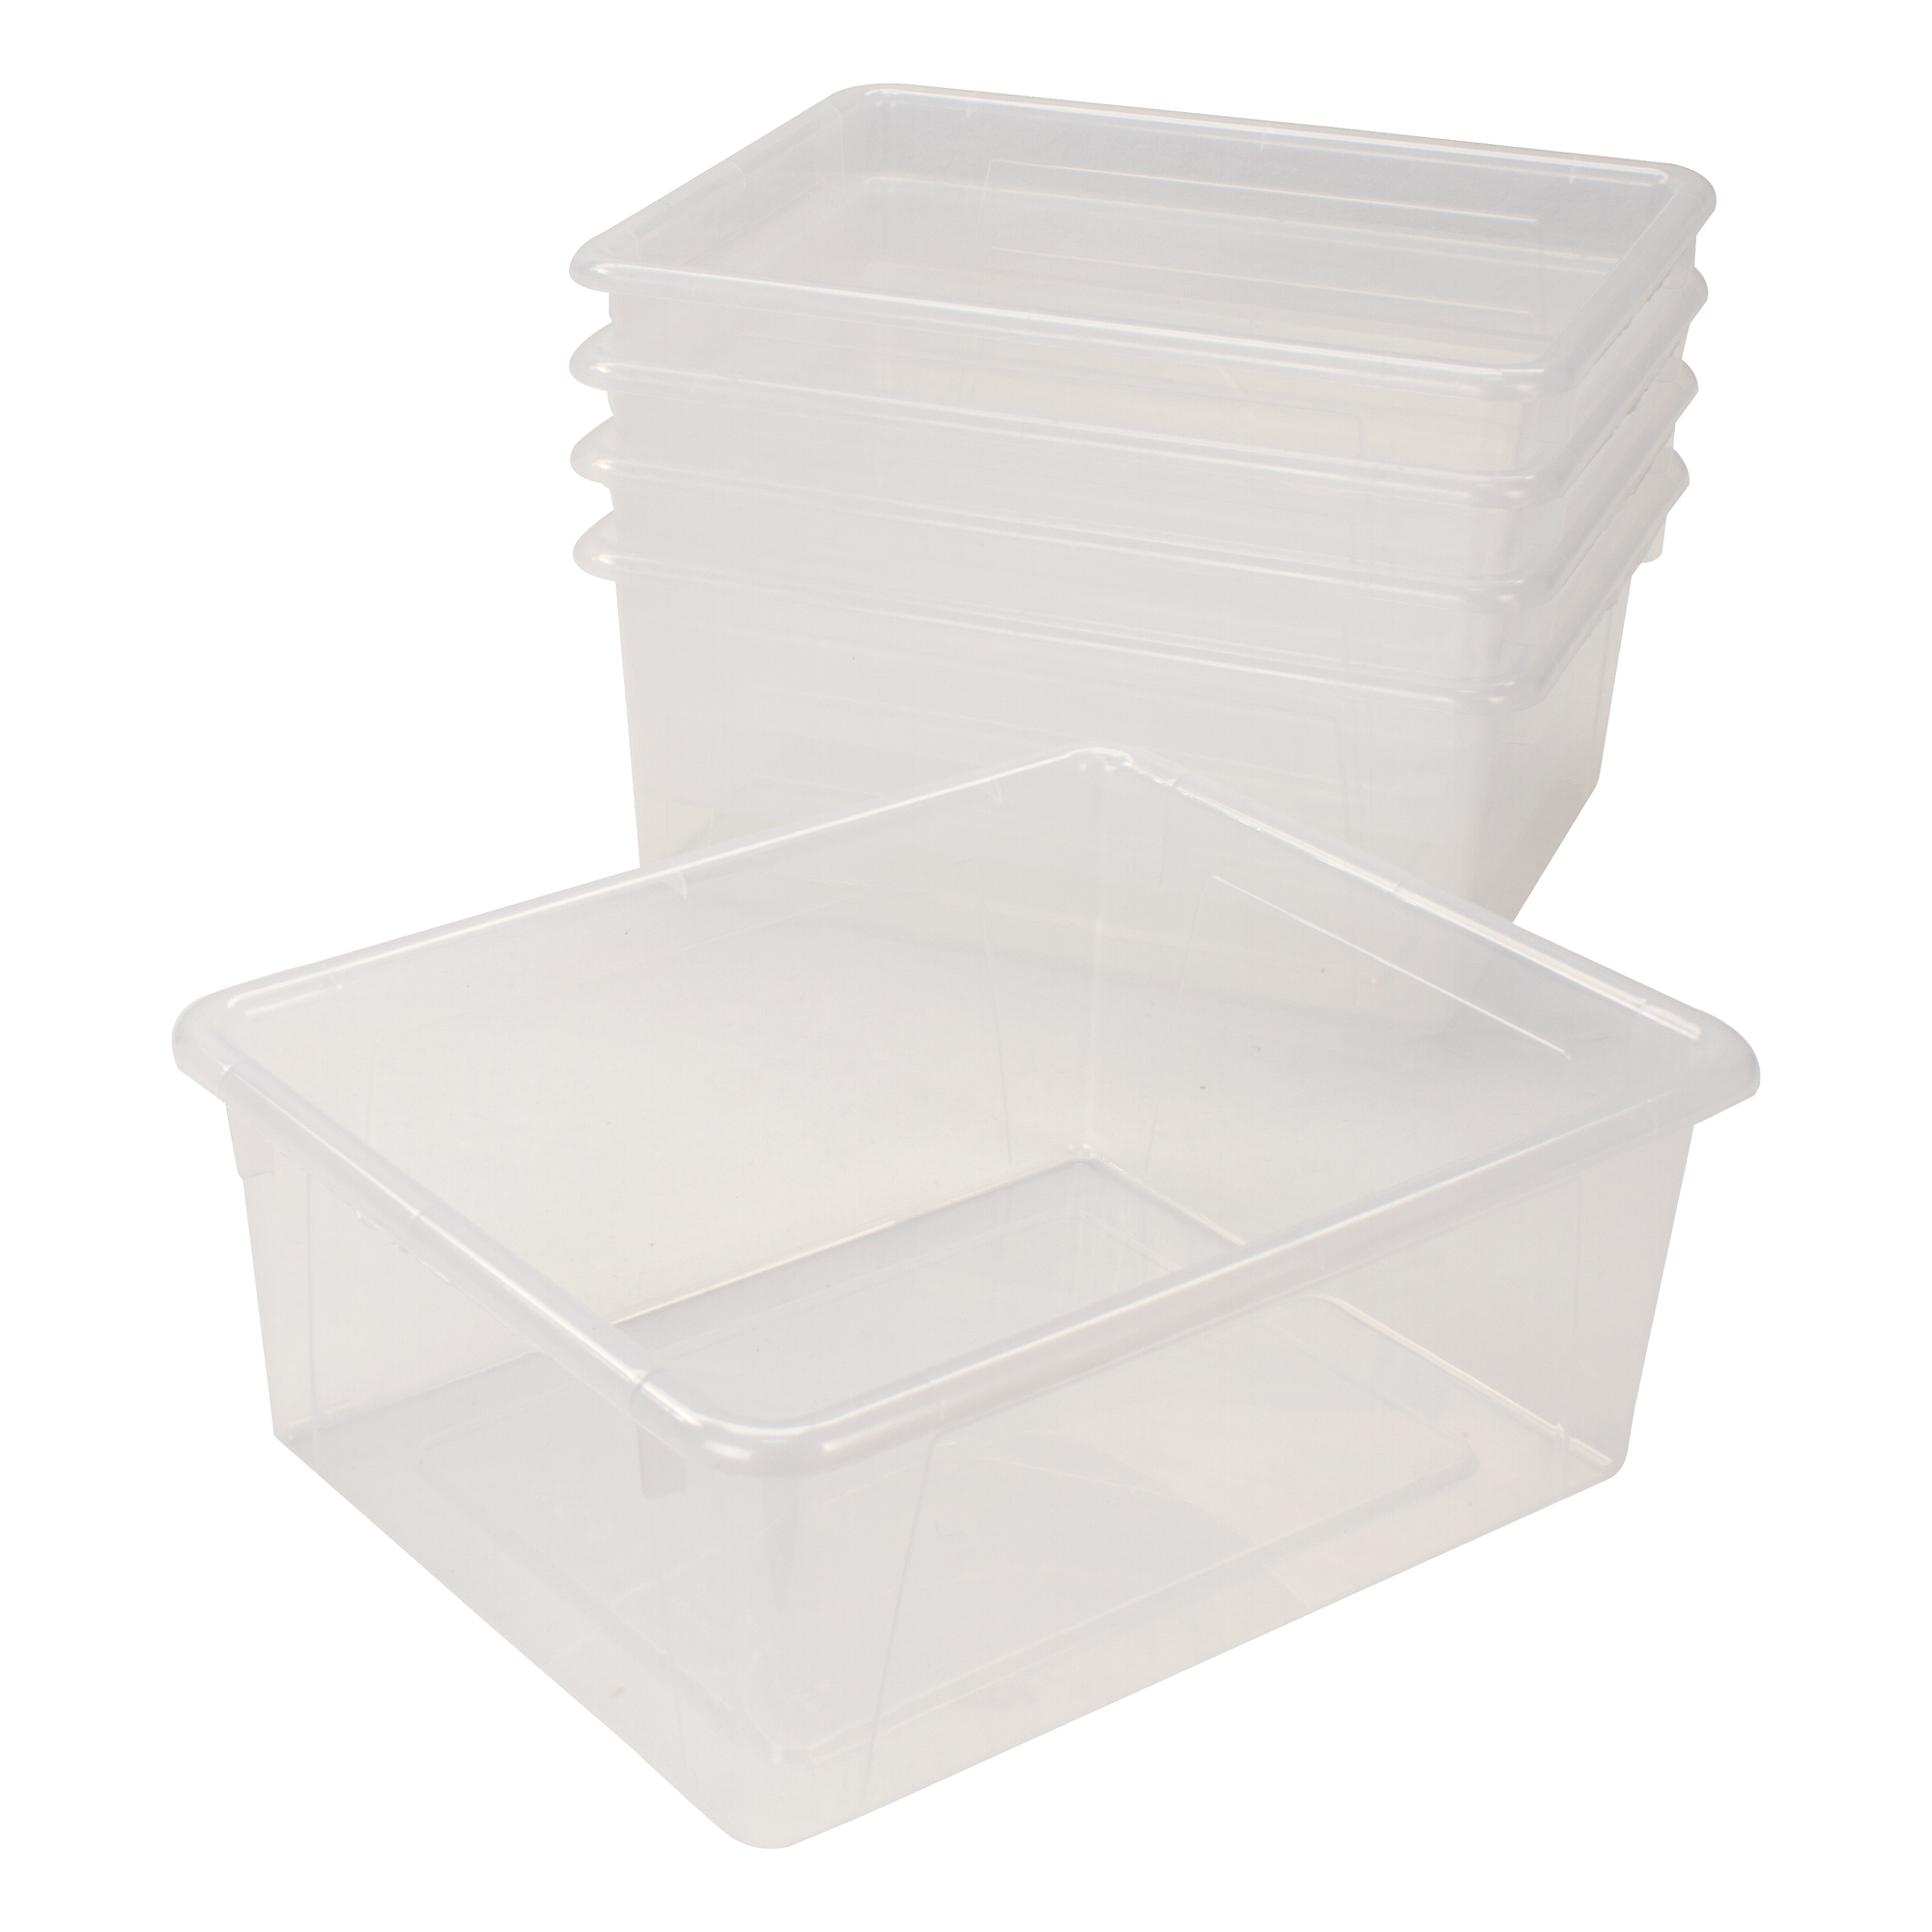 Storex Deep Storage Tray, Letter Size, 10 x 13 x 5 Inches, Unbreakable Clear, 5-Pack